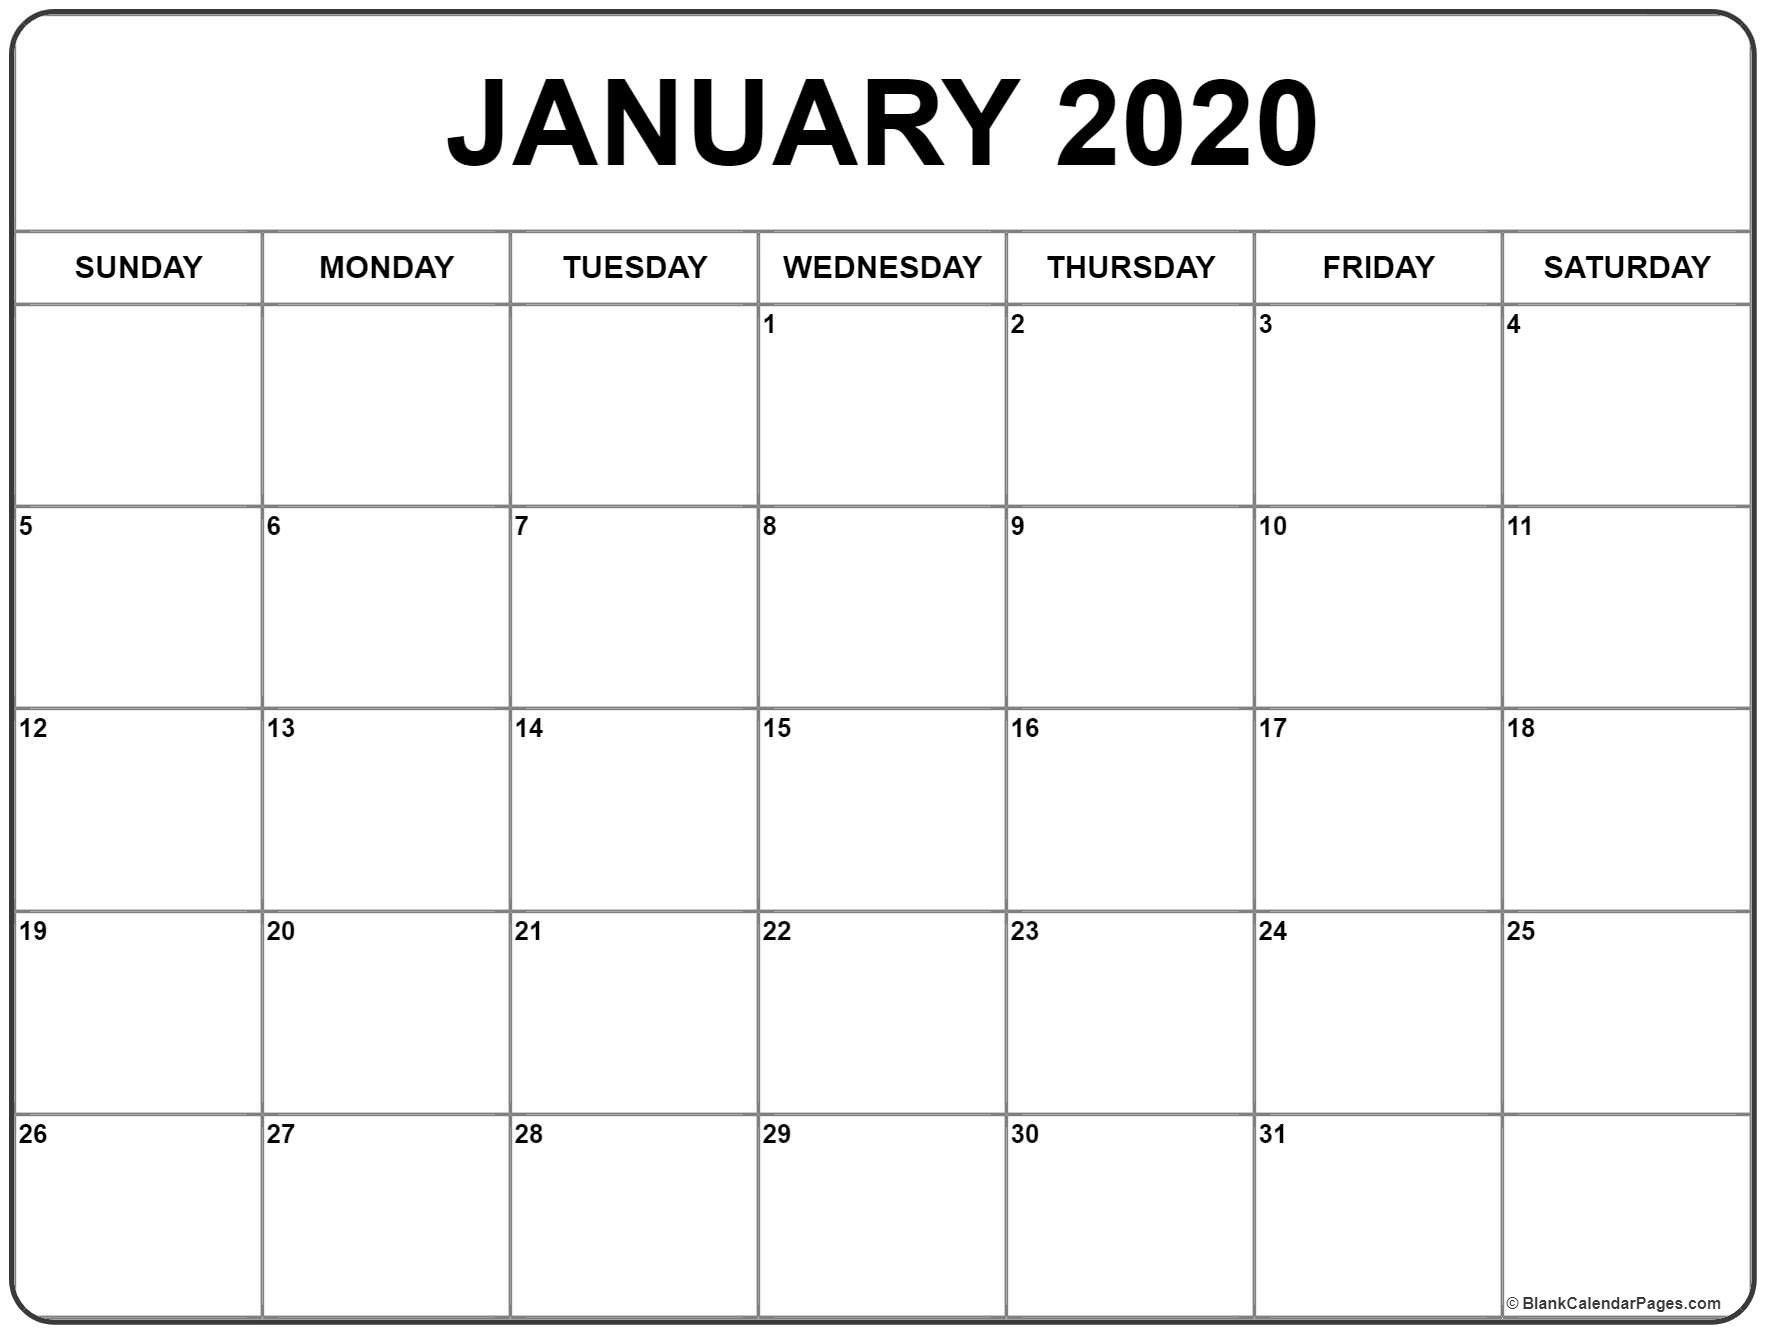 Blank Calendars To Print Without Downloading 2020 | Free  Print Free Blank Calendar Without Downloading